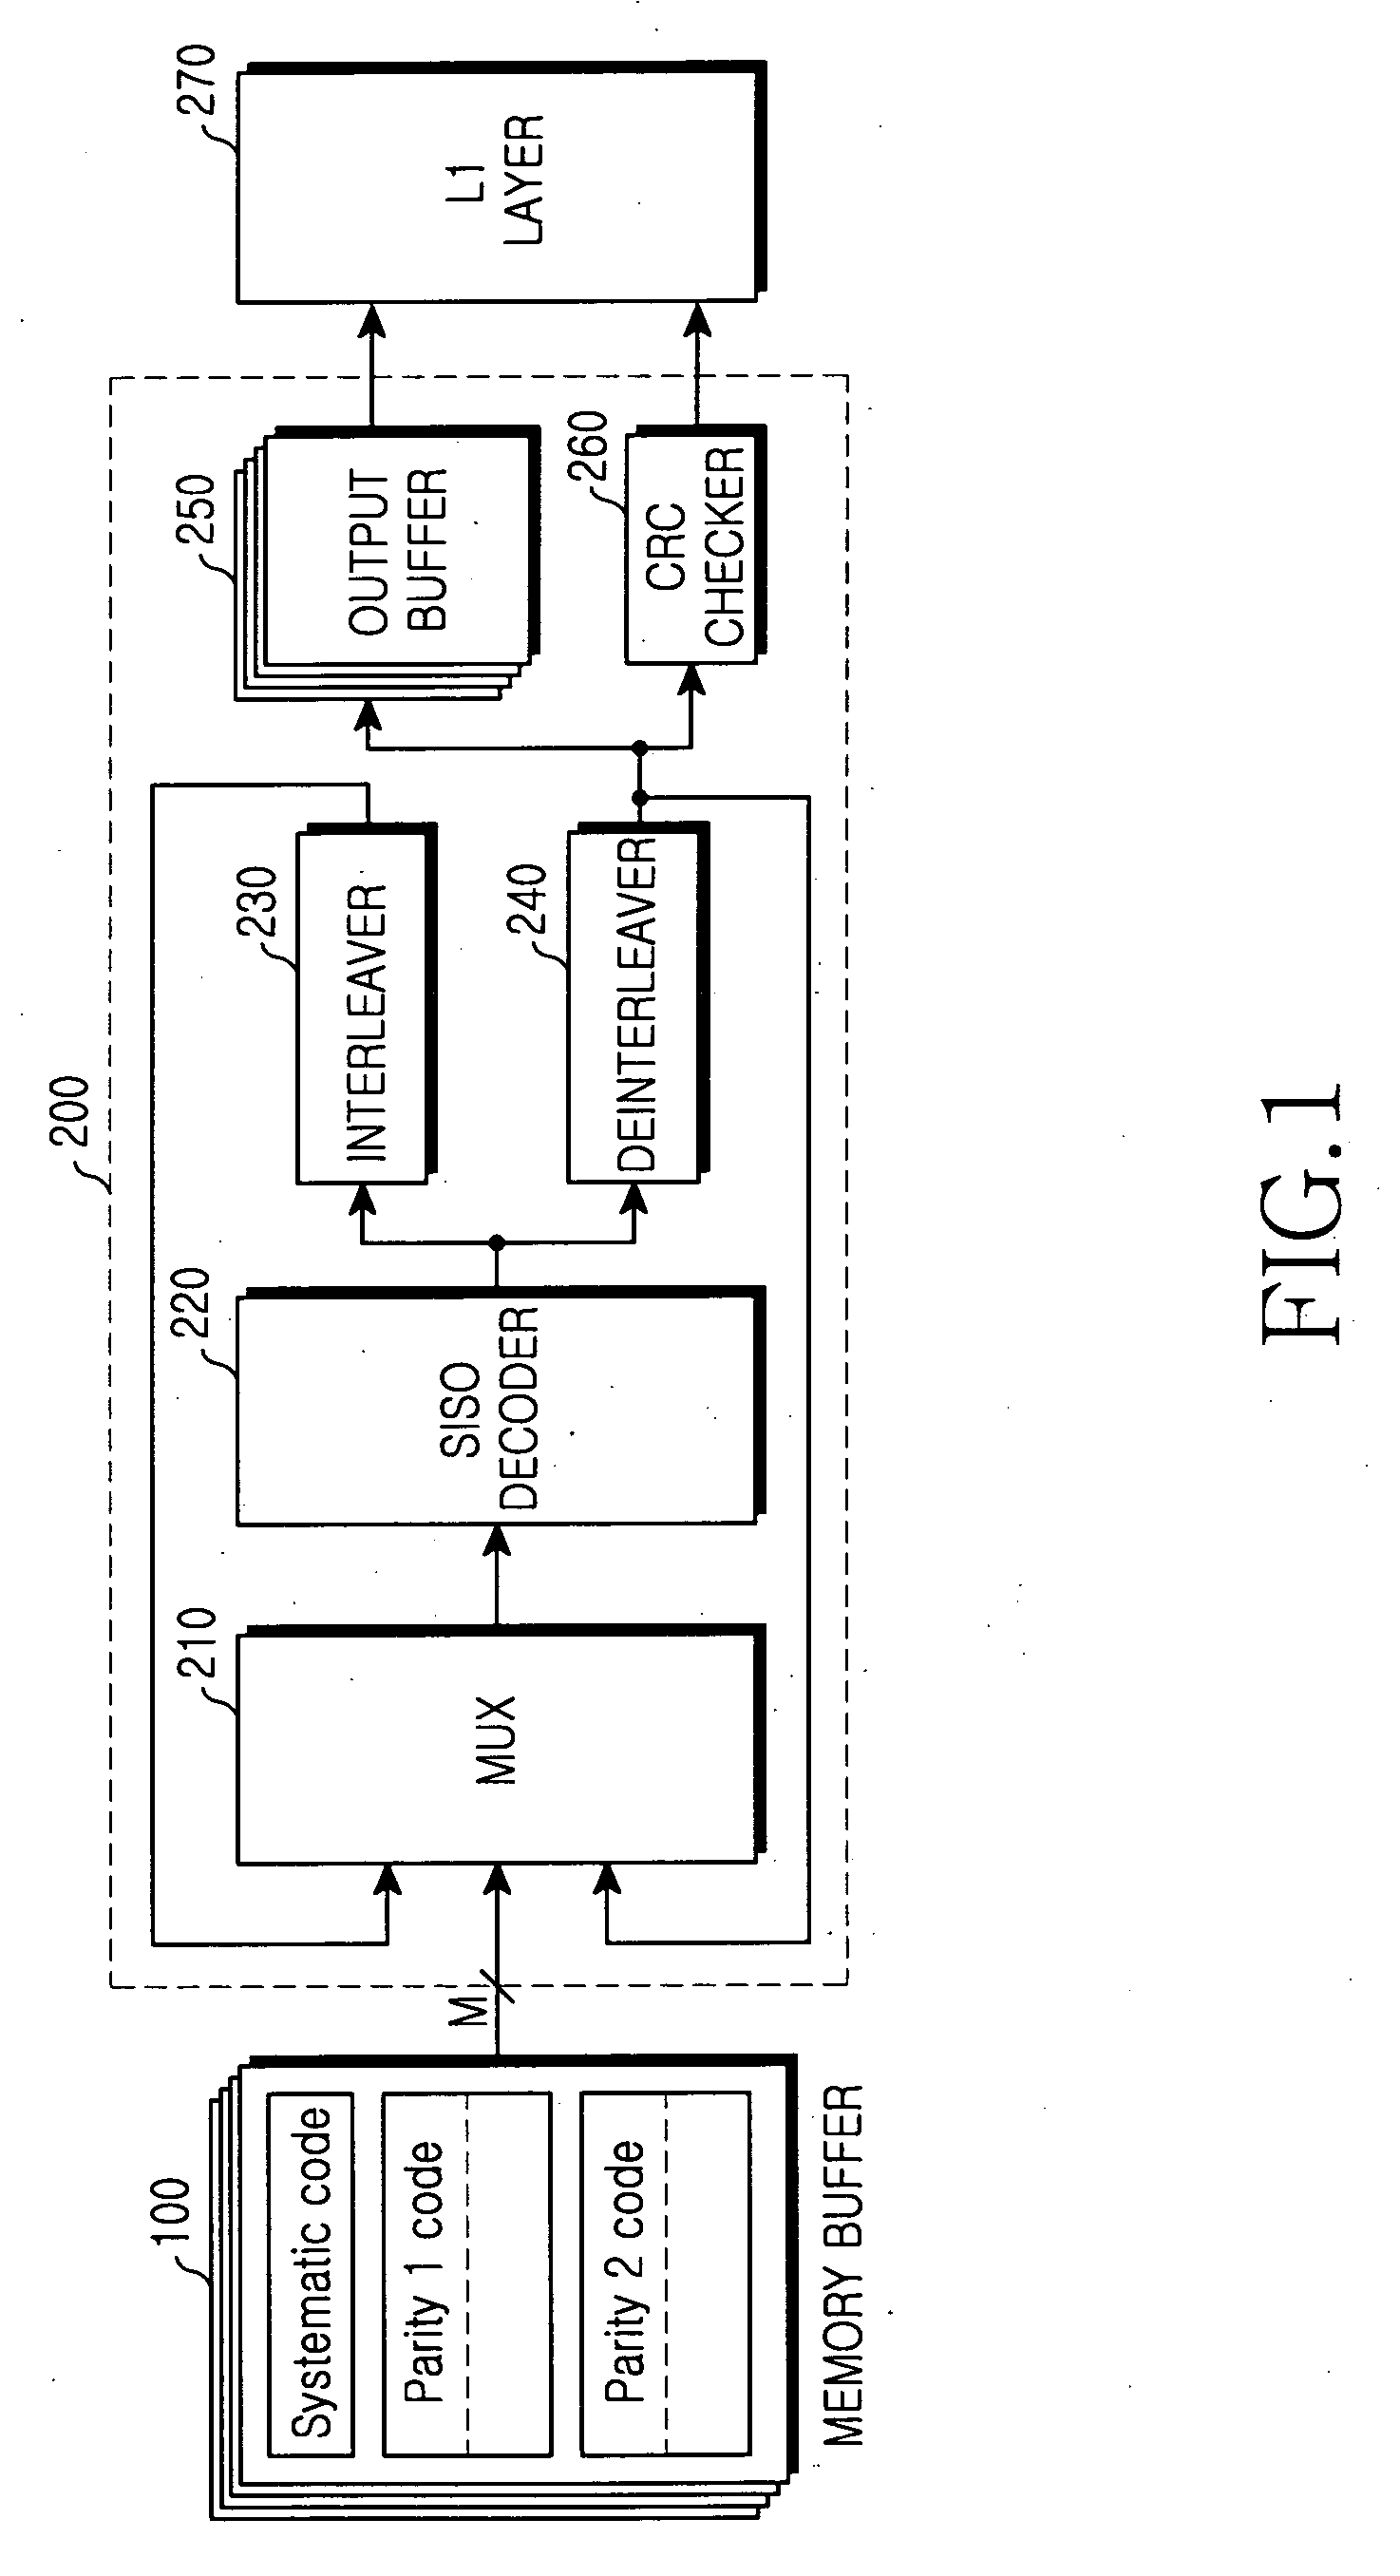 Apparatus and method for turbo decoding using a variable window size